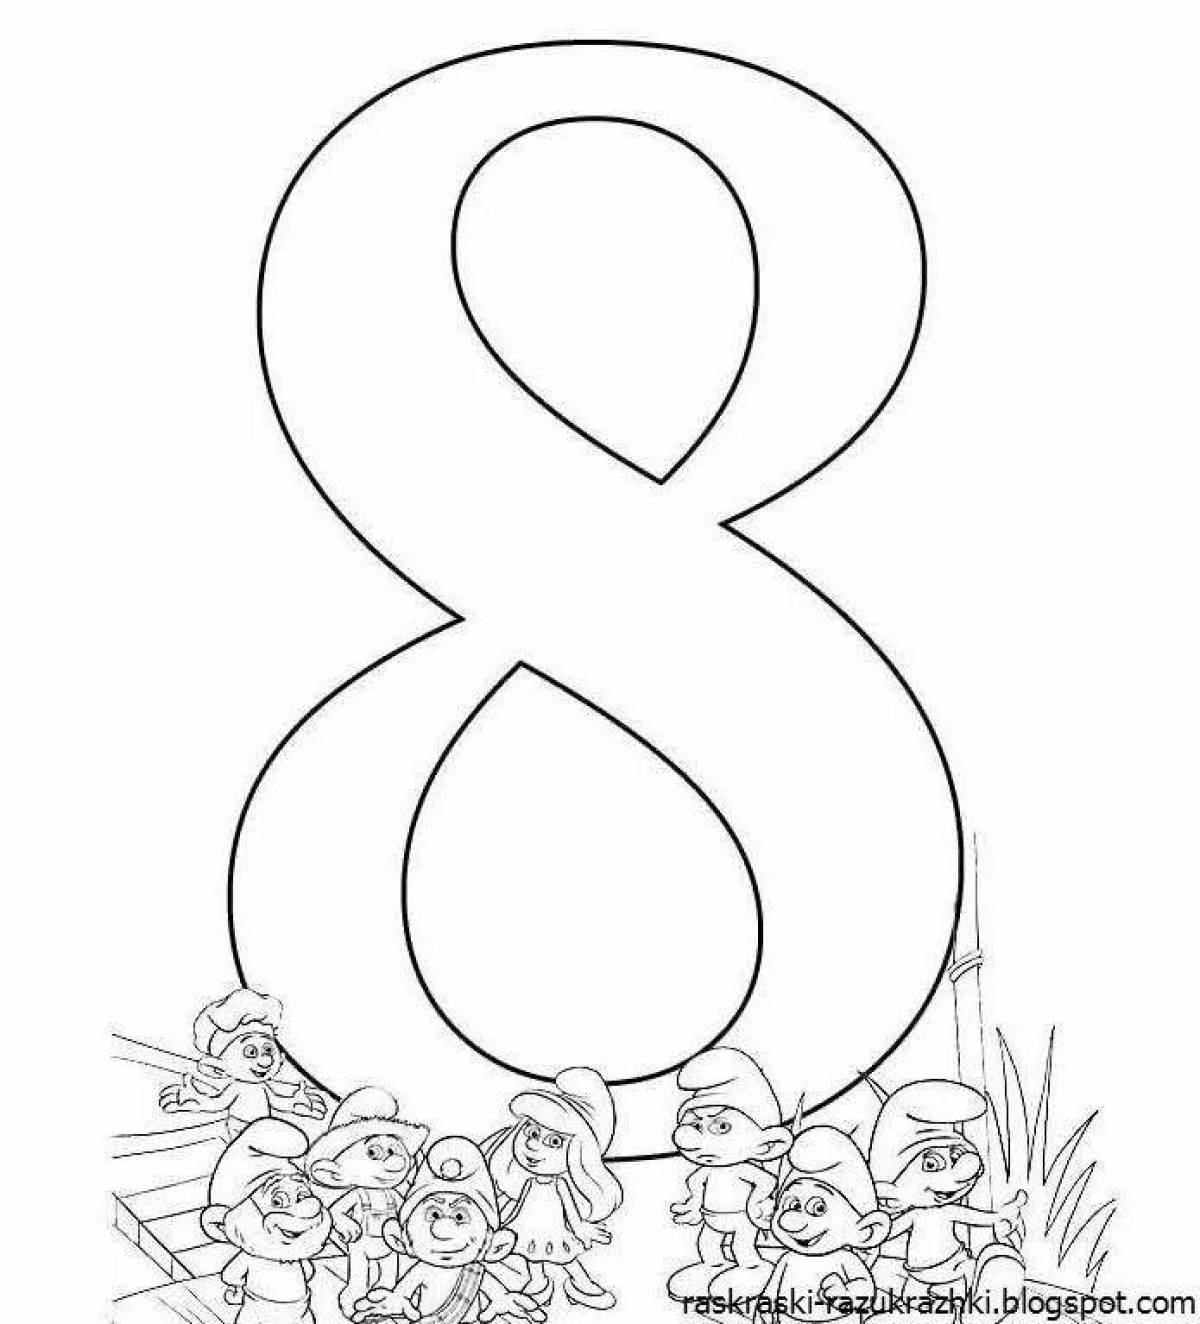 Surreal coloring page 8